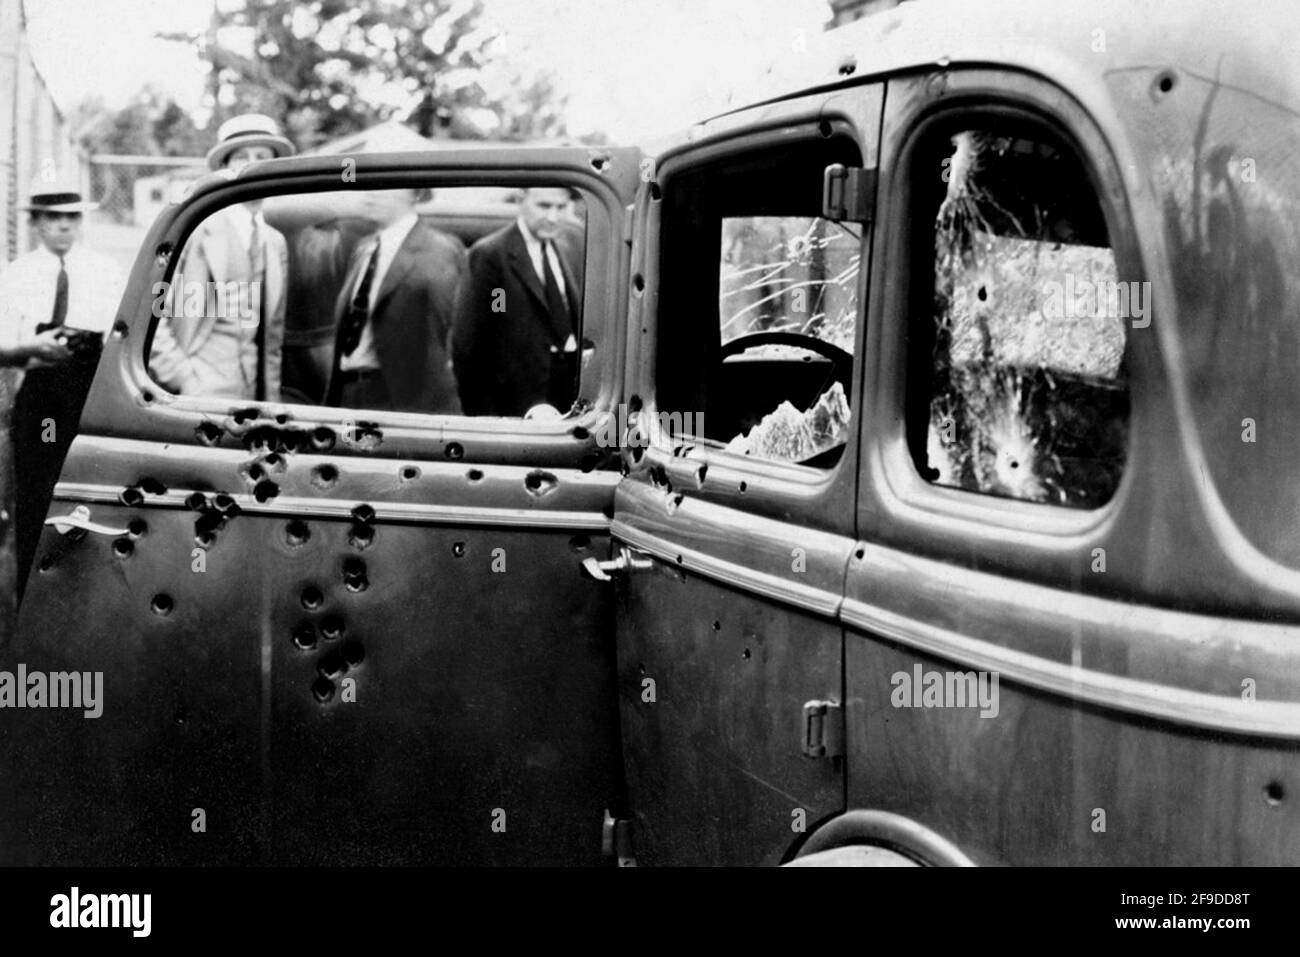 1934 , 23 may , Bienville Parish , Louisiana , USA : The death car of famous gangsterns  BONNIE PARKER  ( 1910 - 1934 ) and CLYDE BARROW ( 1909 - 1934 ). Contrary to popular belief the two never married. They were in a long standing relationship. Posing in front of a 1932 Ford V8 automobile. Recovered from Bonnie and Clyde after their deaths on May 23, 1934 . Unknown photographer . - OUTLAWS - KILLER - ASSASSINO - delinquente - criminalità organizzata  - GANGSTERN - Bos - CRONACA NERA - CRIMINALE - car - automobile - crivellamento di proiettili ---  Archivio GBB Stock Photo